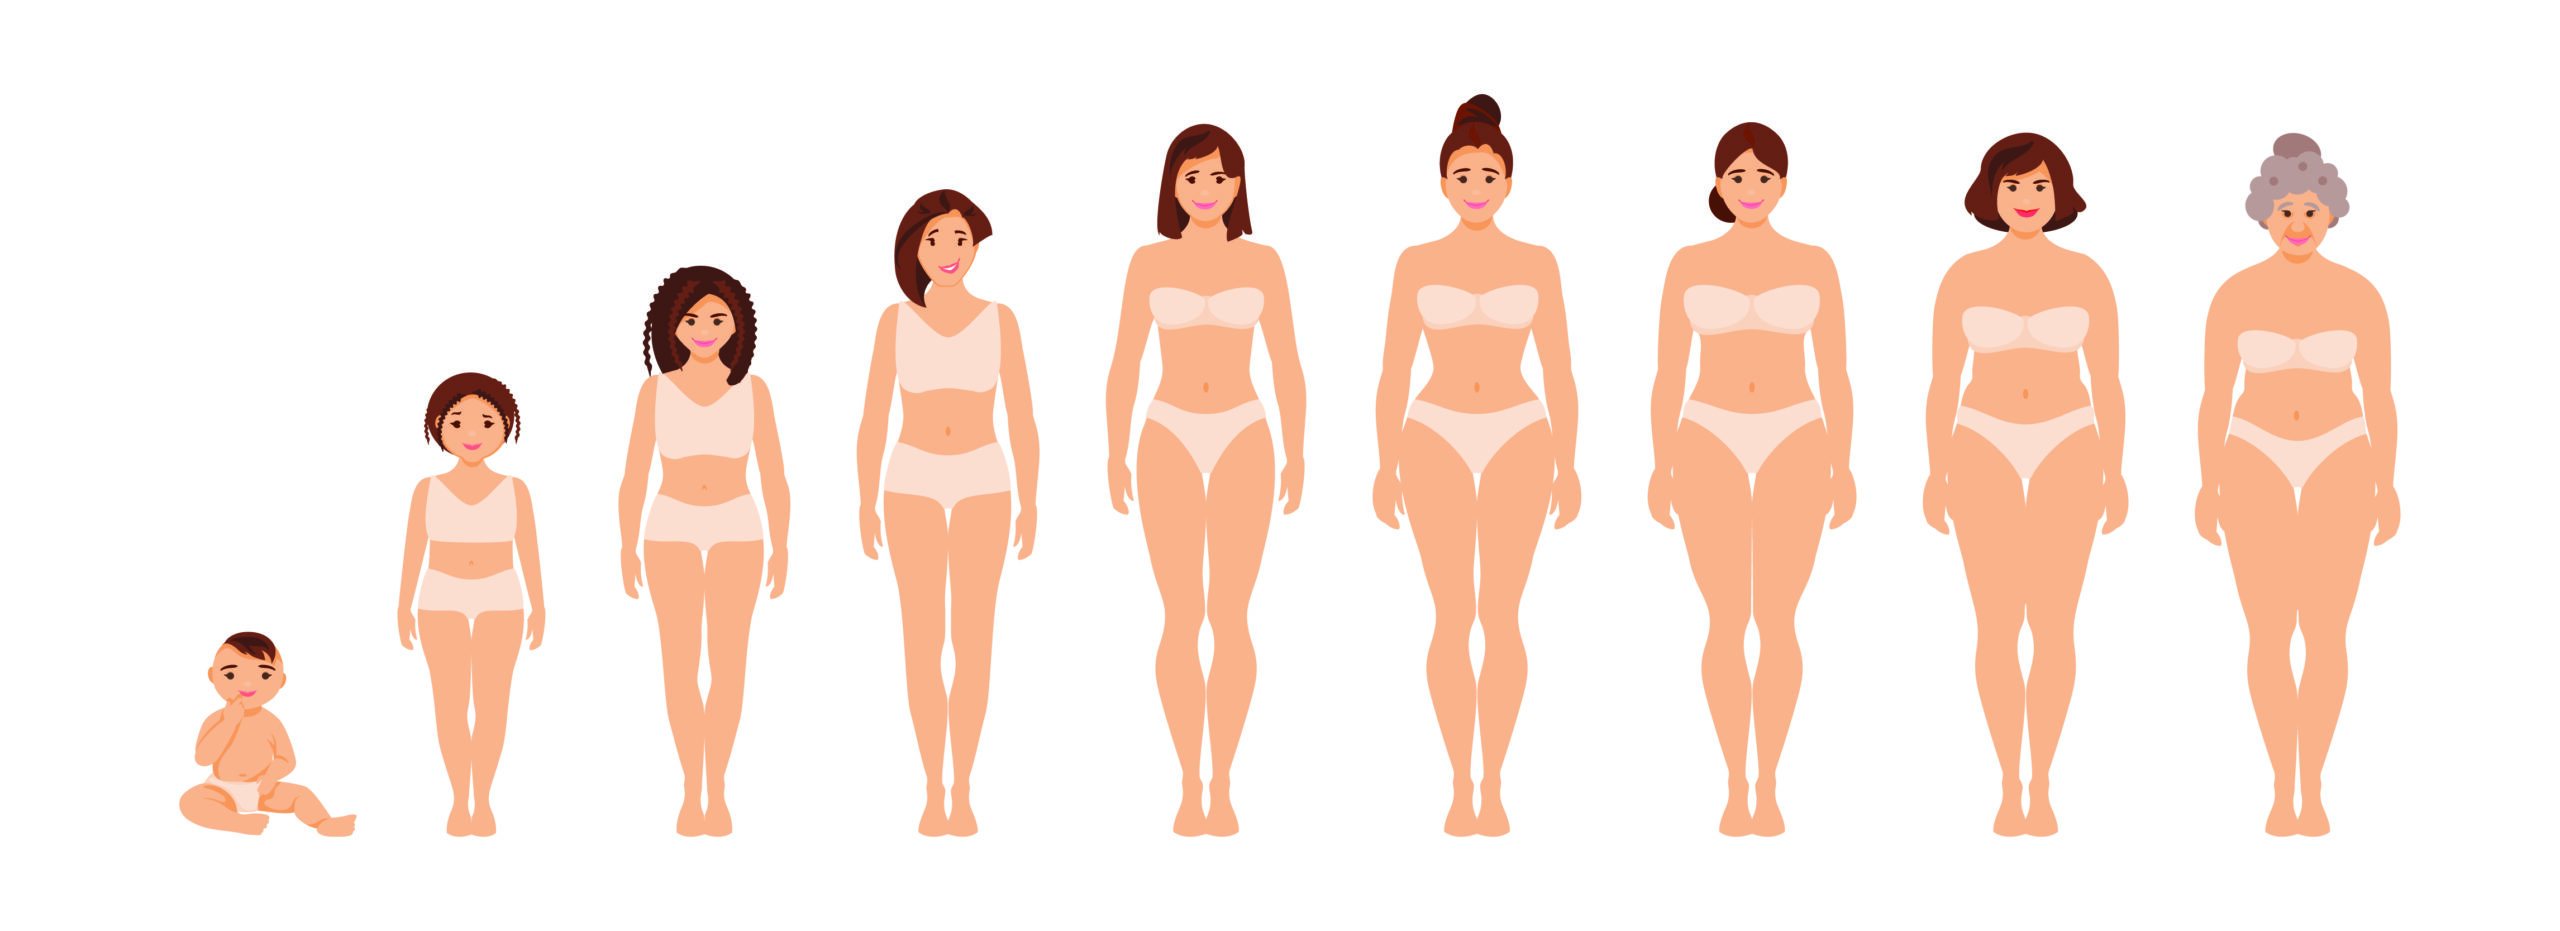 Body Dissatisfaction Can Lead to Eating Disorders at Any Age